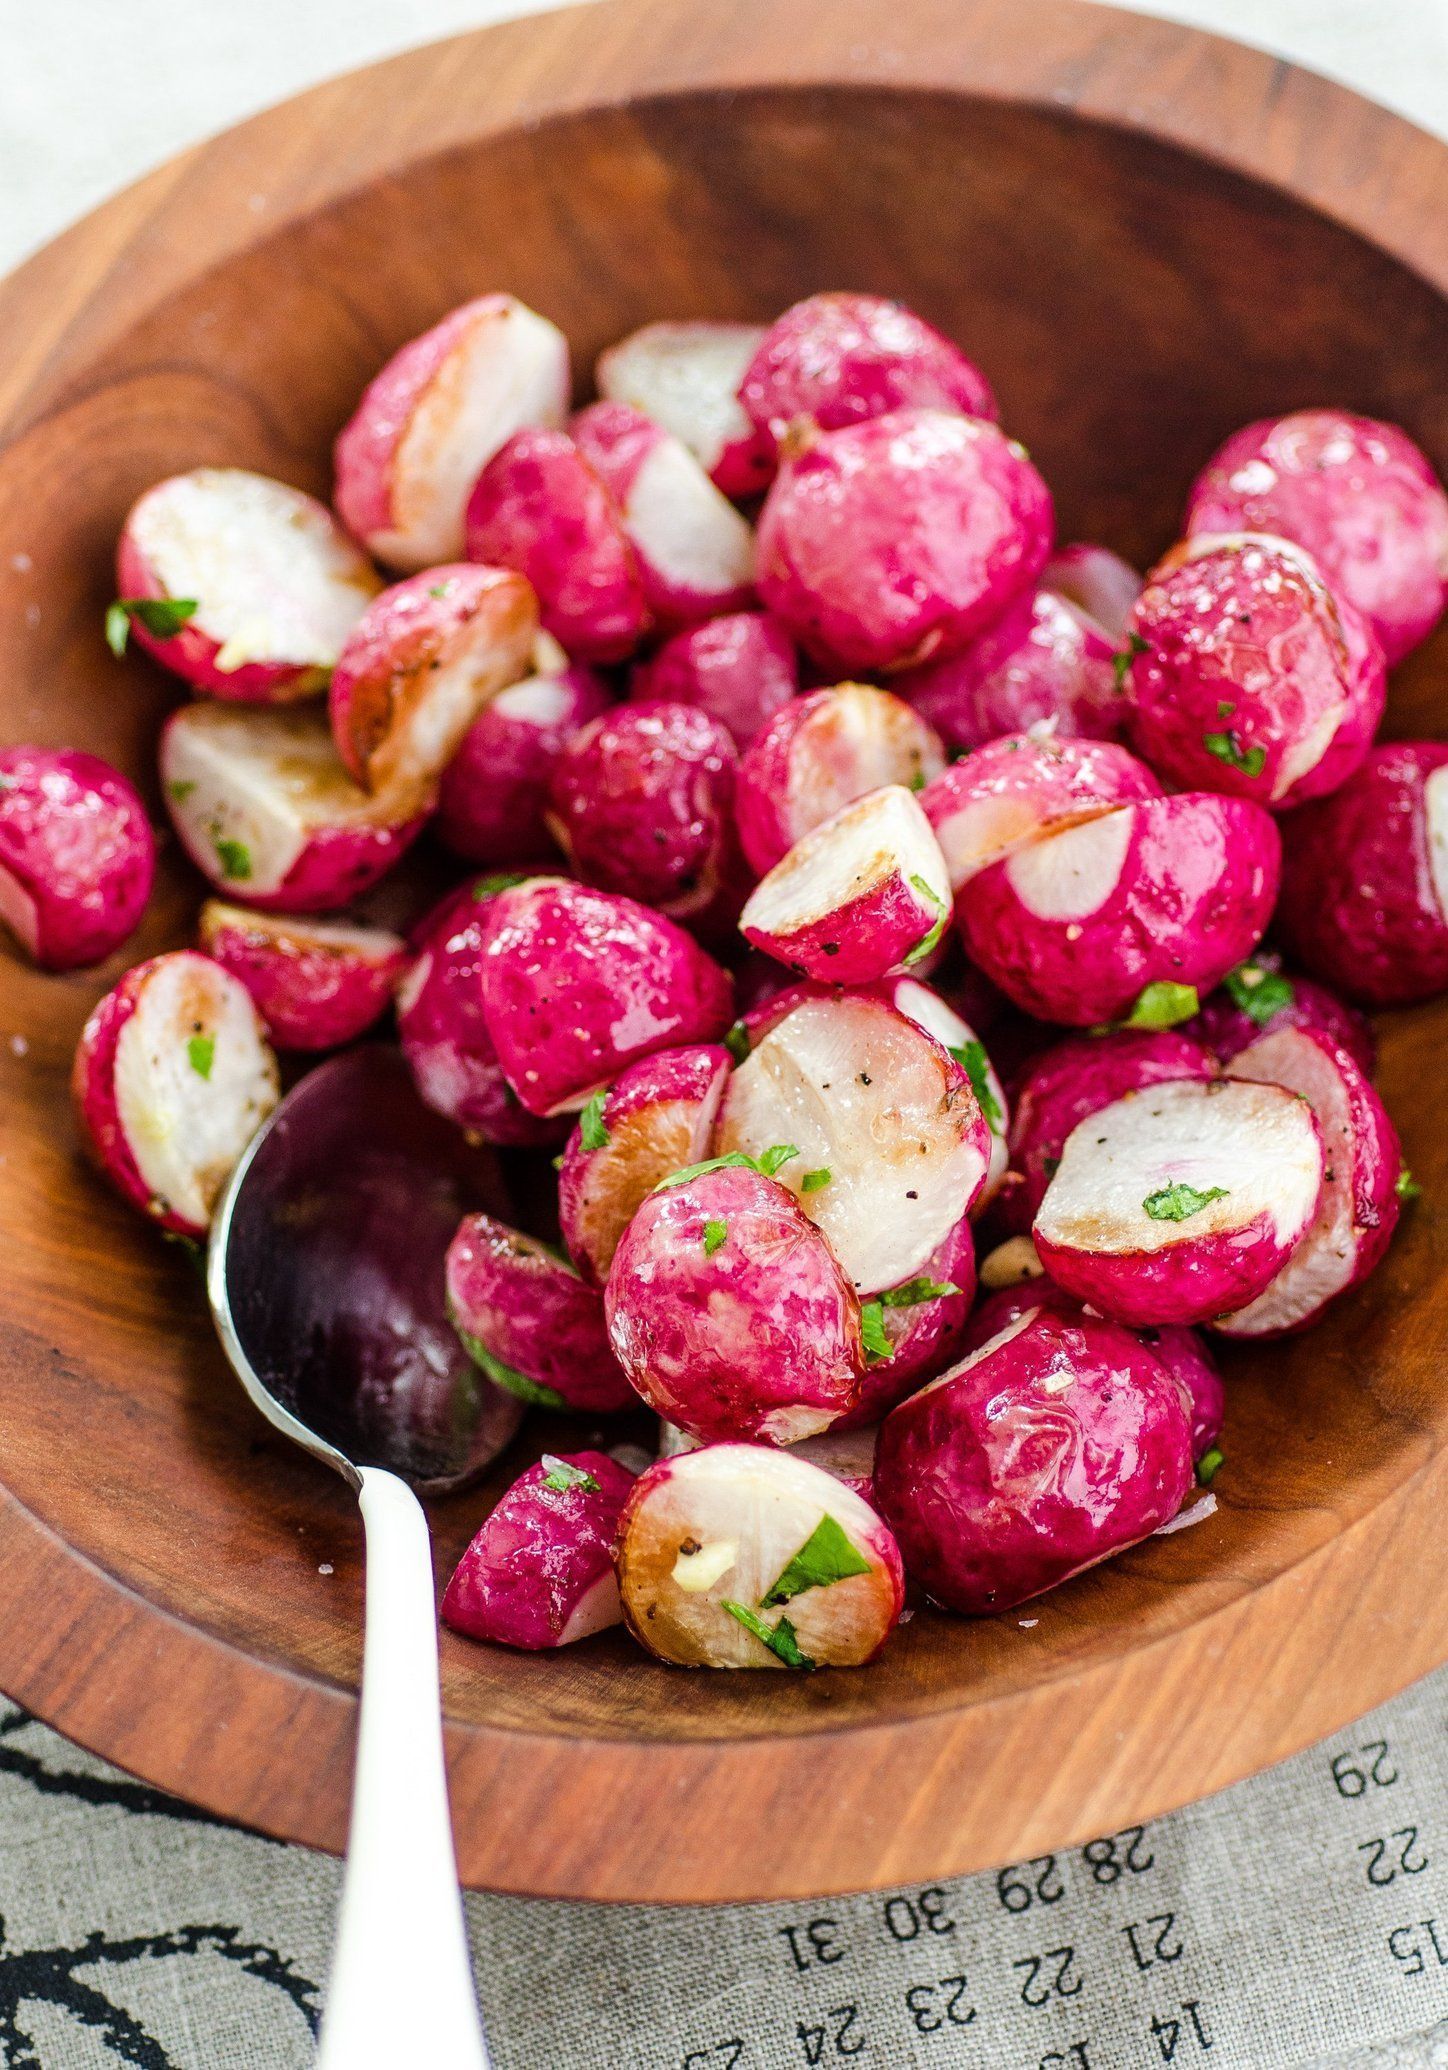 Roasted radishes are so EASY to make and SO tasty. Quick dinner side that’s a little more interesting that a standard roasted